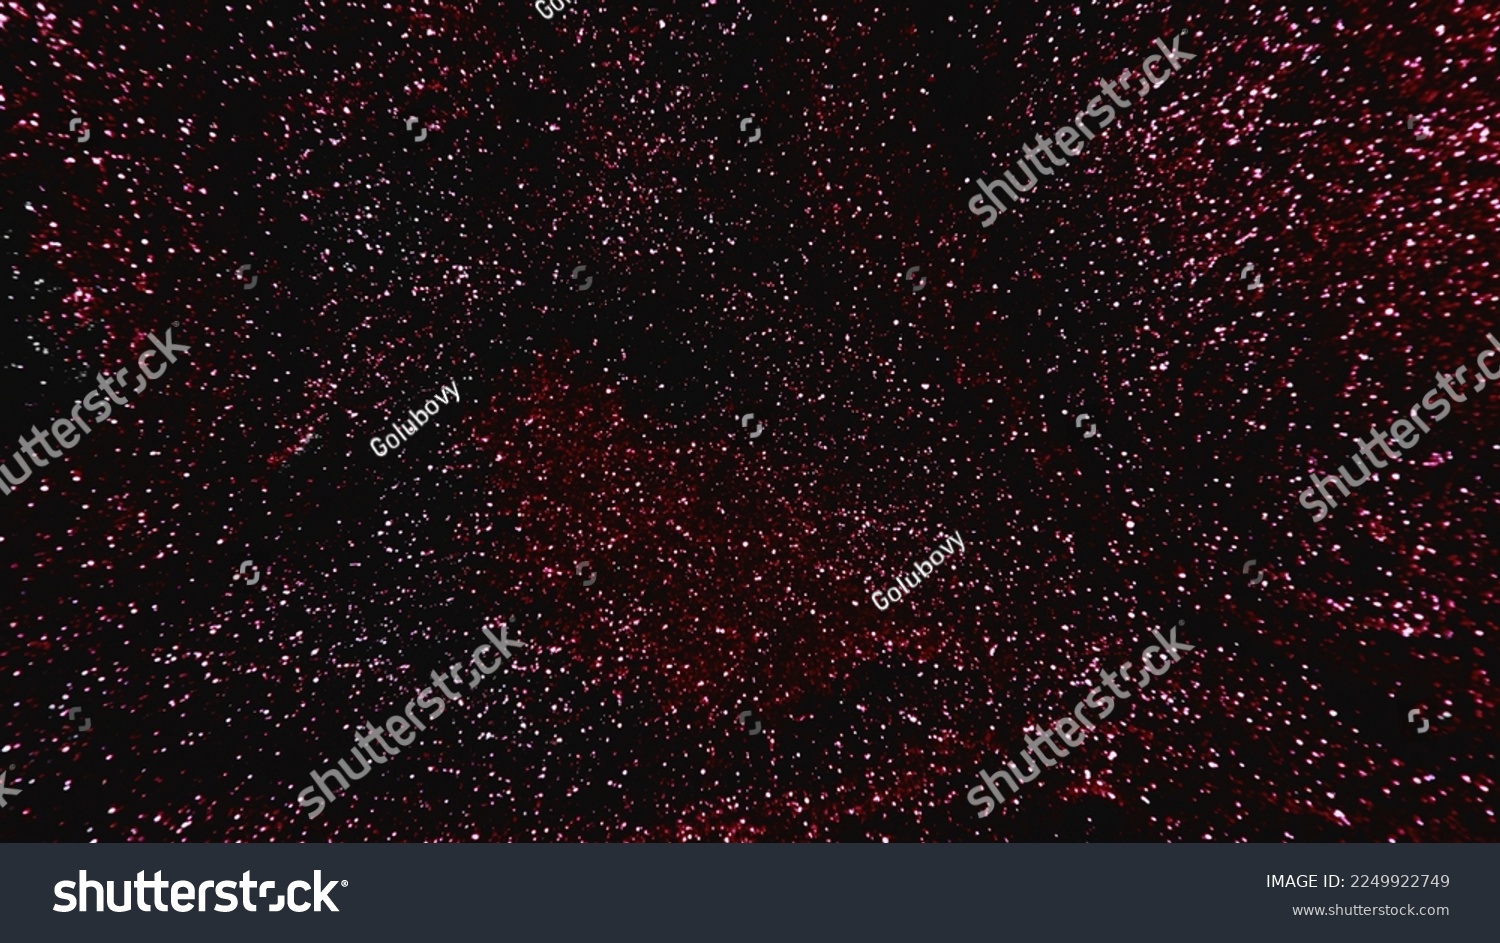 Sparkling background. Grain texture. Bokeh glow. Defocused shimmering red pink black color glitter sparks on dark abstract free space. #2249922749